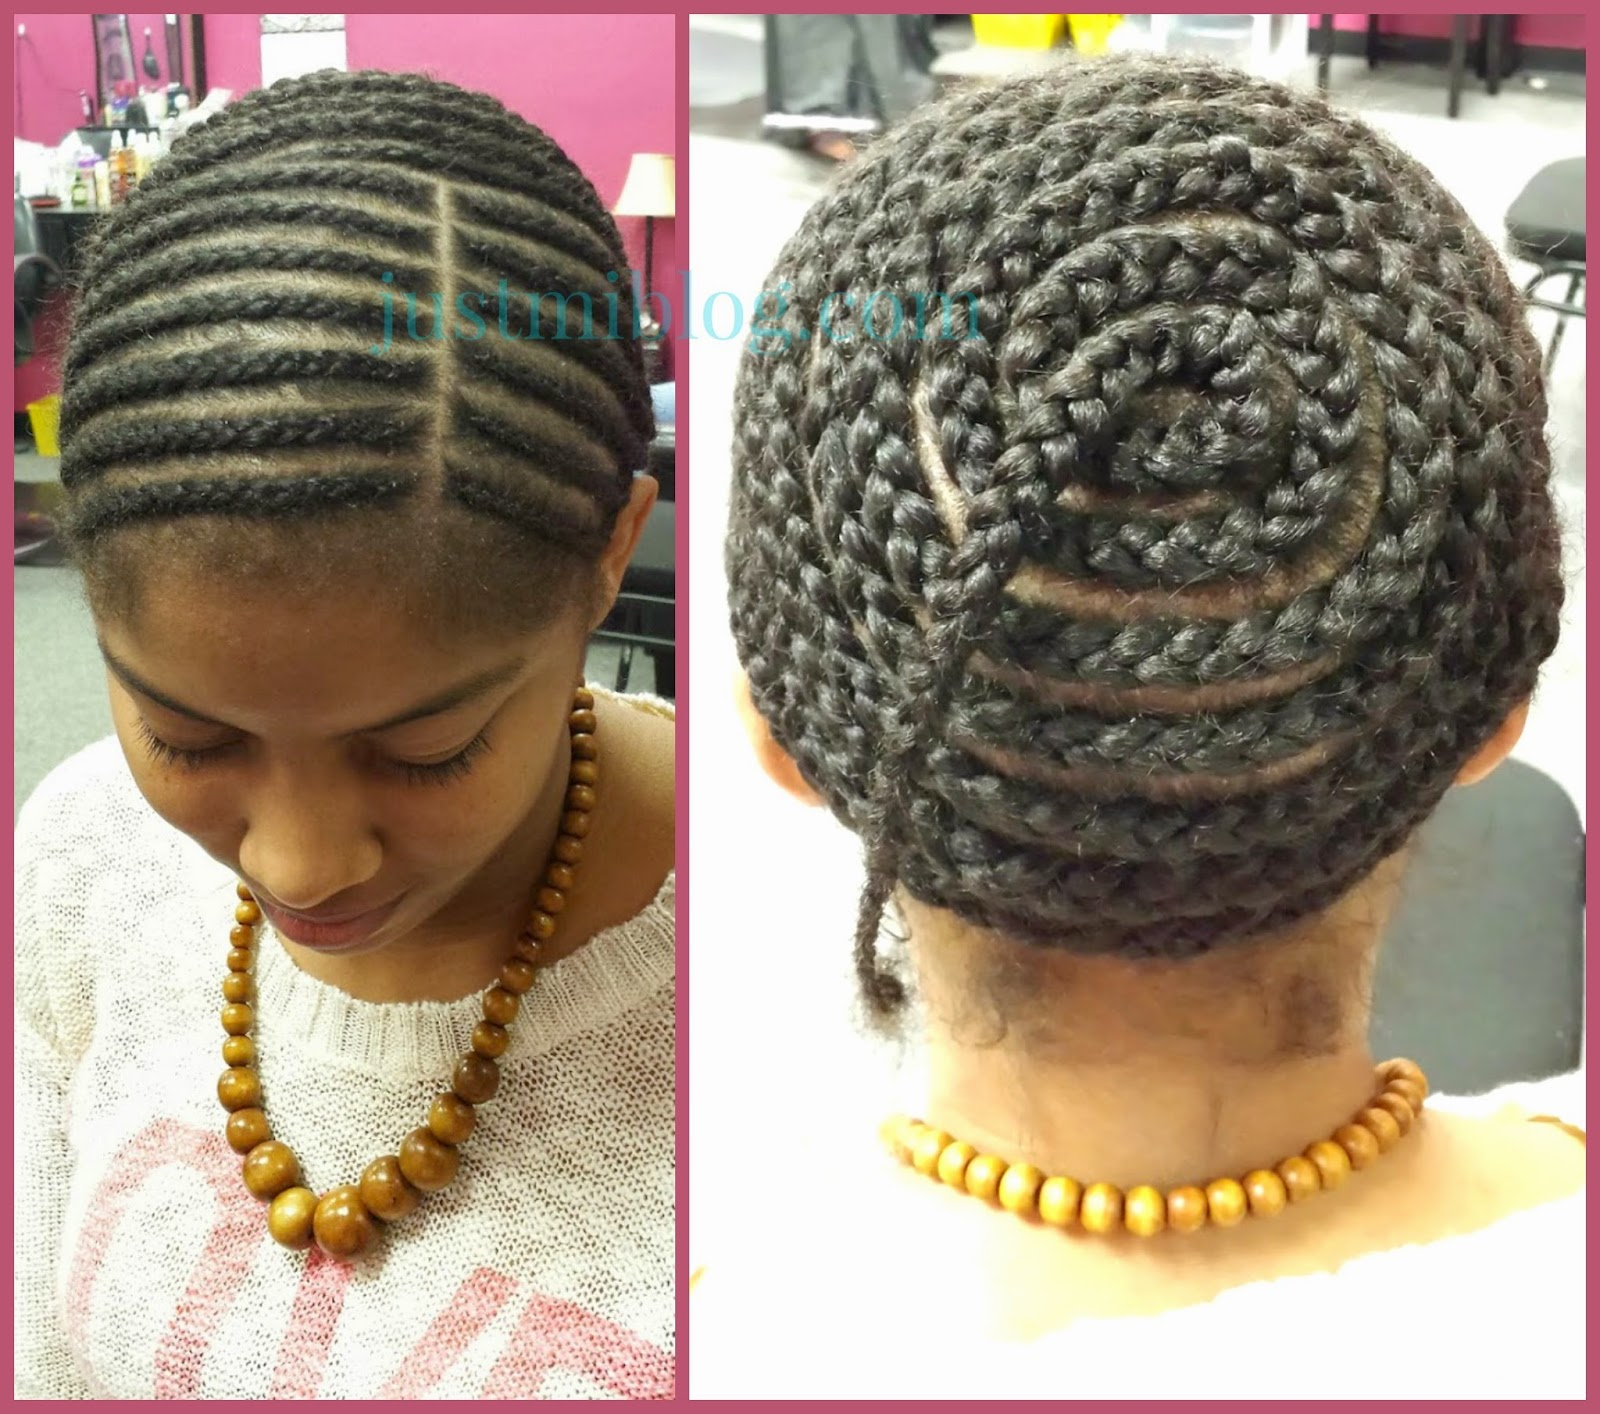 Crochet Hair Patterns Crochet Braid Patterns To Try Out